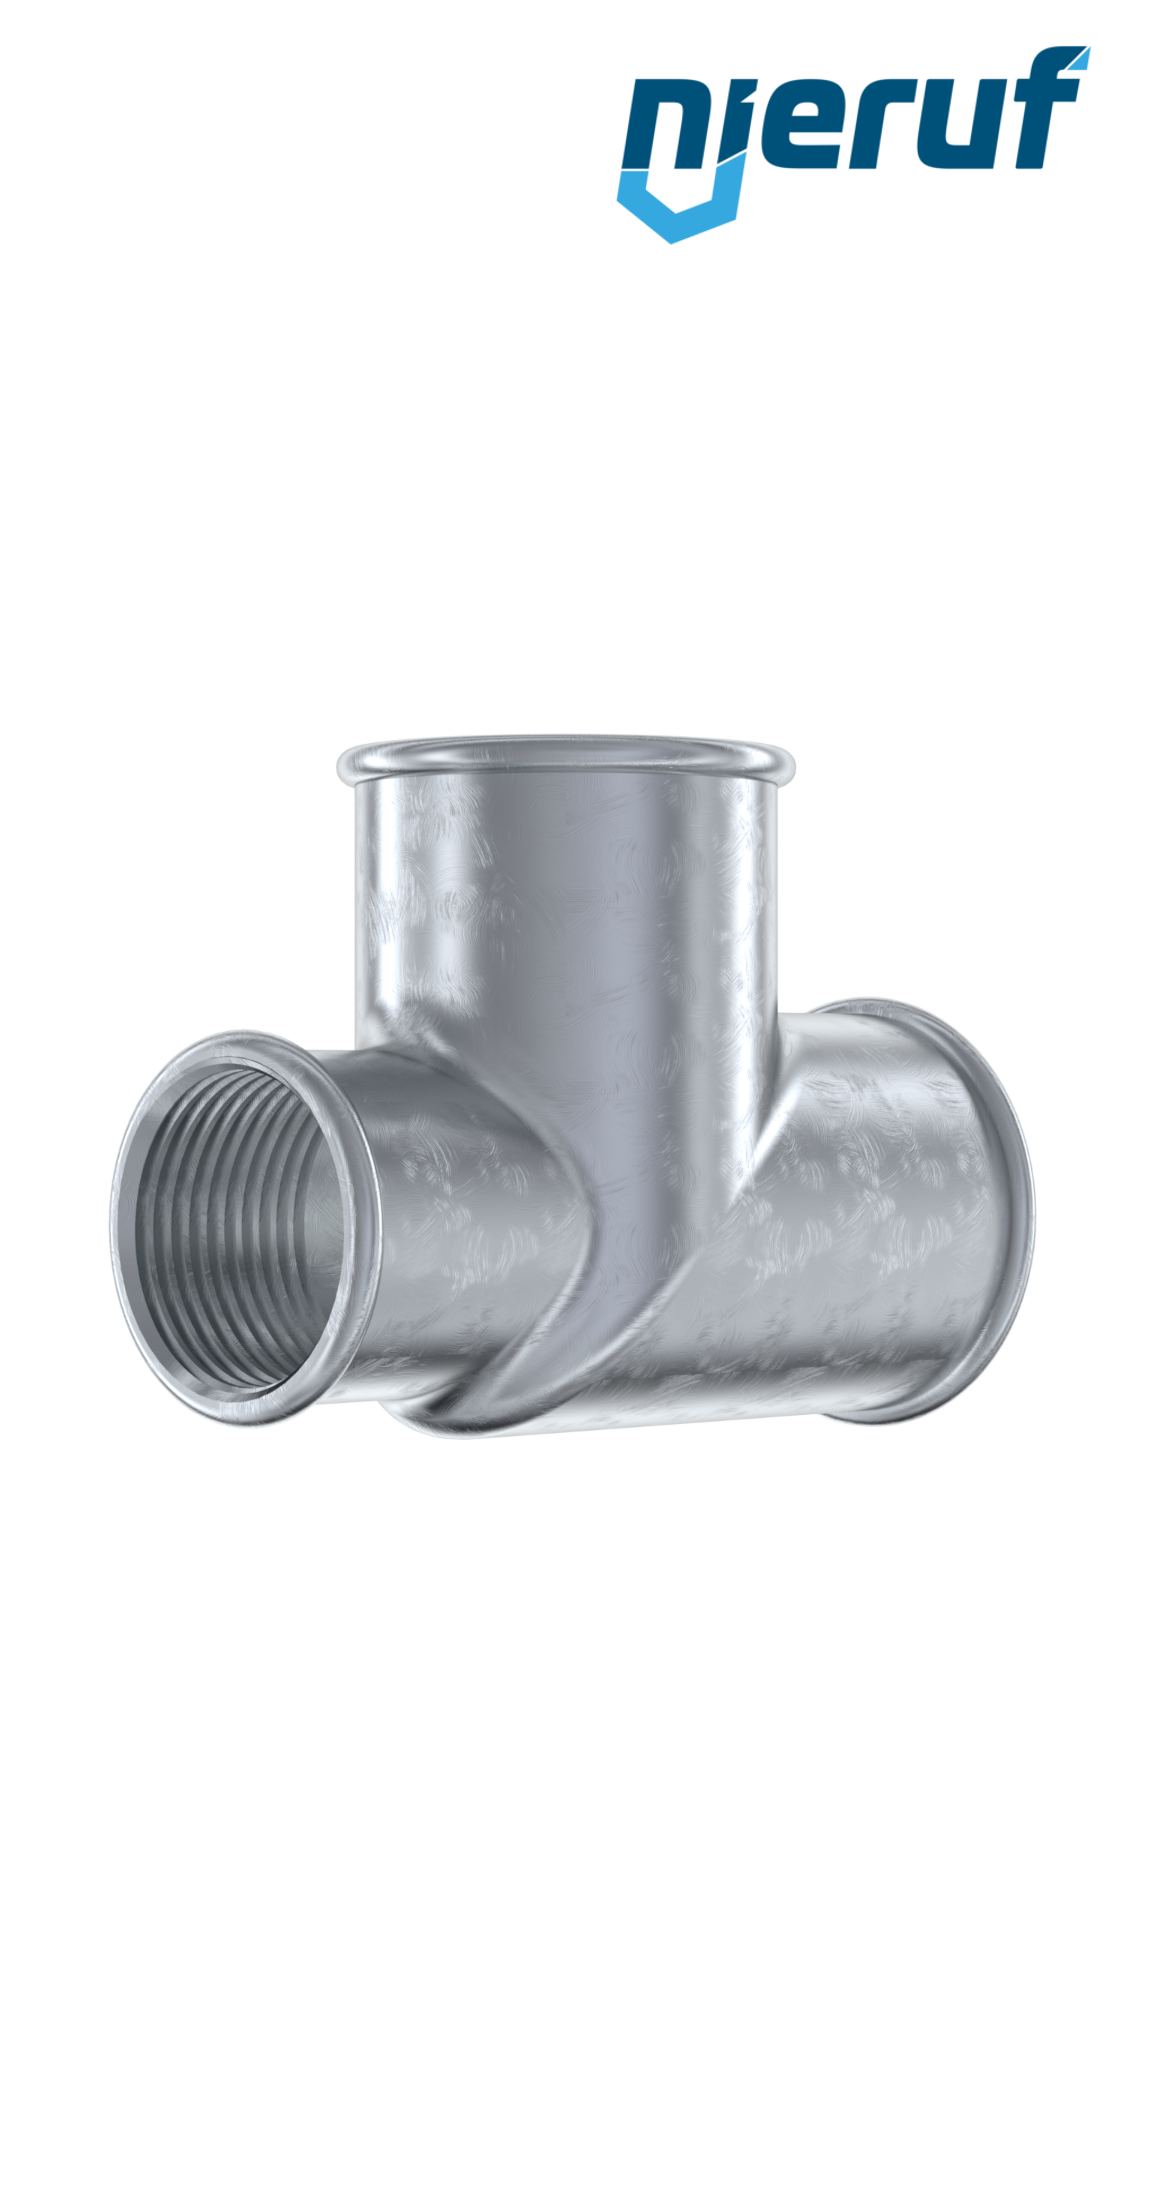 Malleable cast iron fitting tee reducing on the run no. 130, 1" x 3/4" x 1/2" inch galvanized